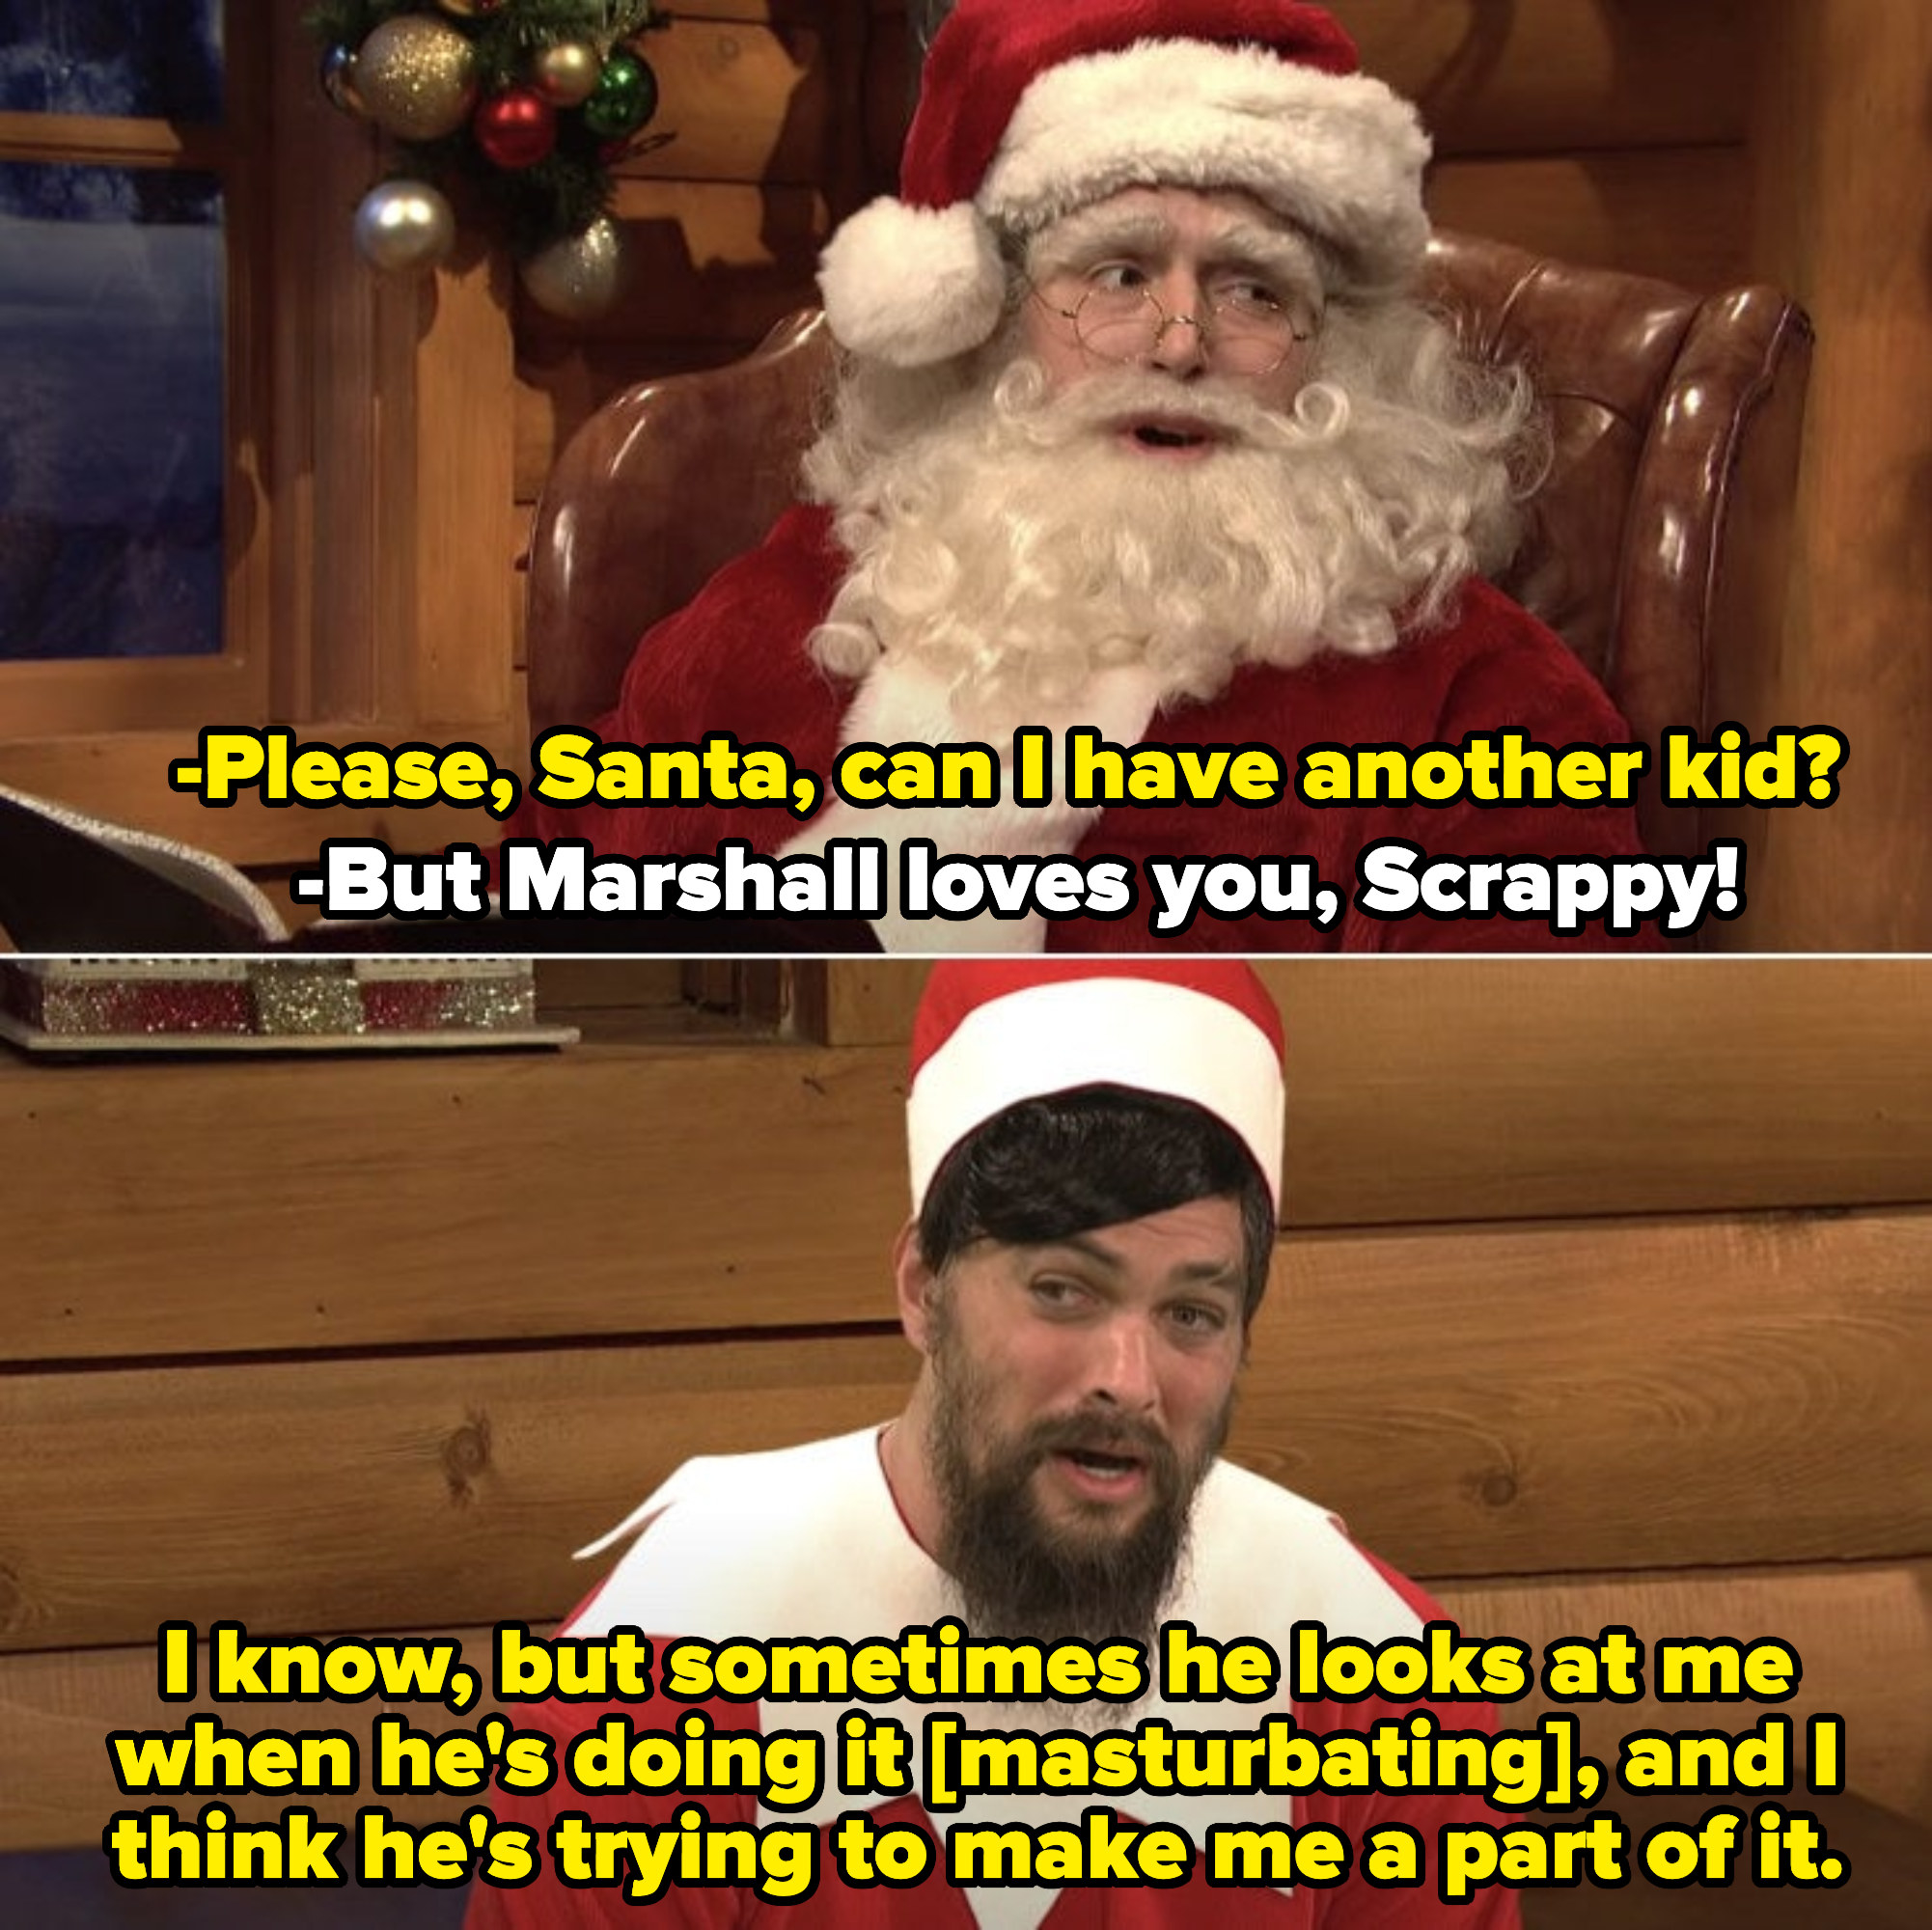 Jason Momoa acting like an Elf on a Shelf, asking Santa to get a new kid, because he feels uncomfortable now that the boy he looks after has started masturbating